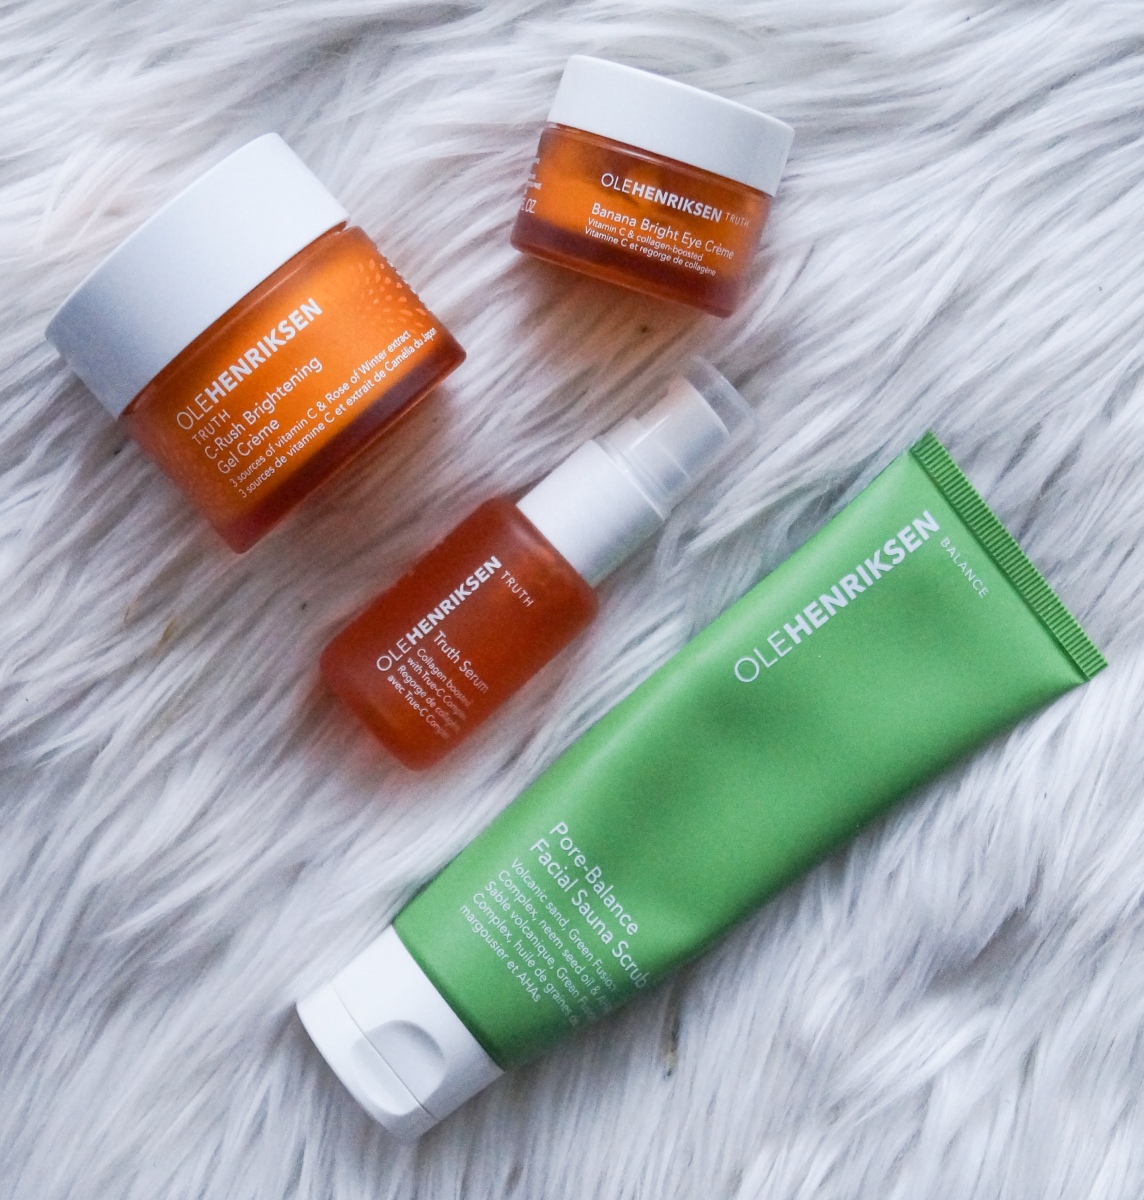 Get to know your Glow Cycle with OLE HENRIKSEN